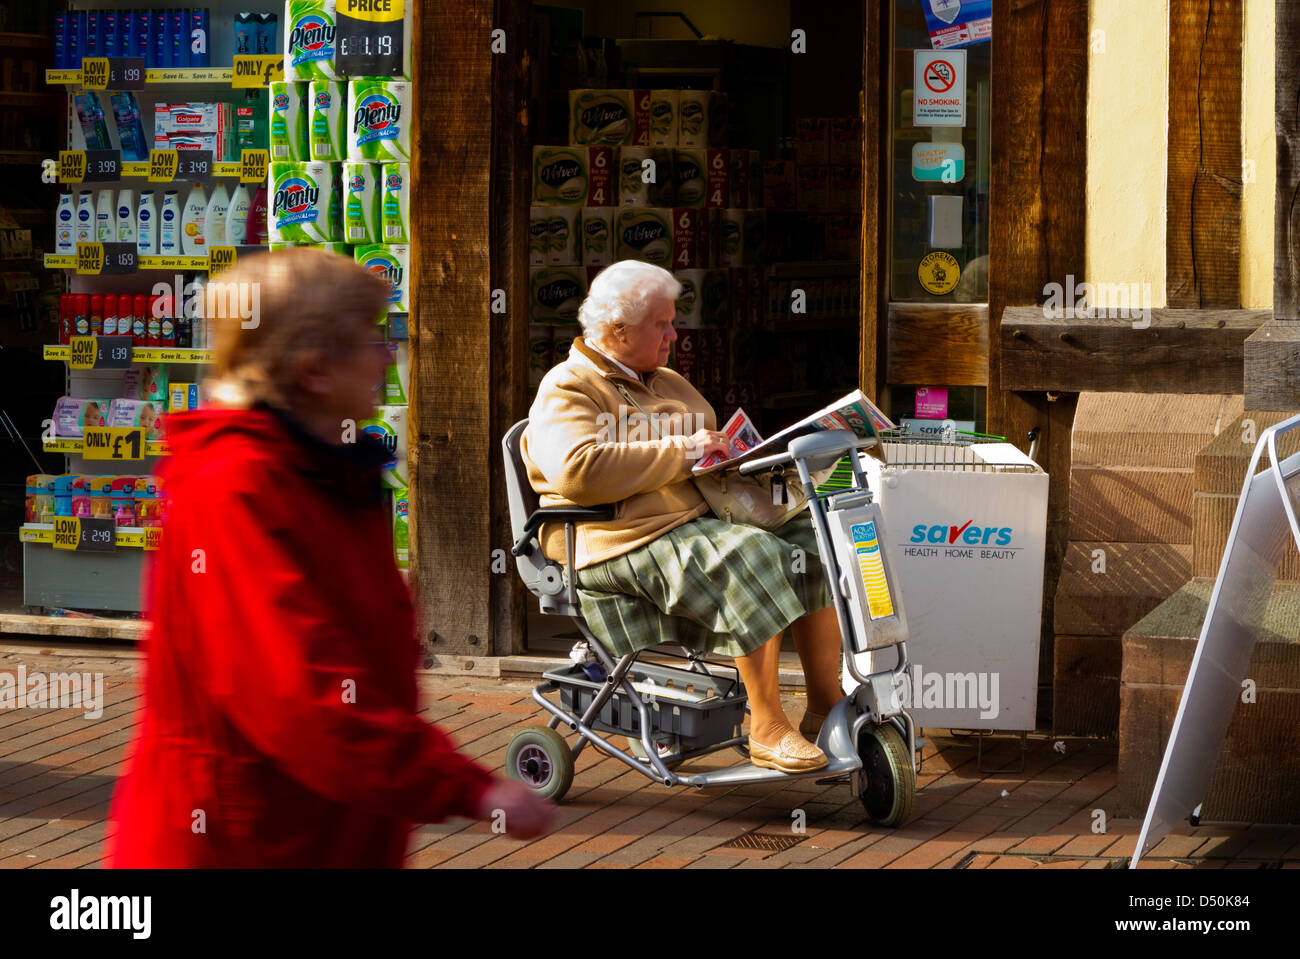 Elderly woman in mobility scooter reading a newspaper outside a shop in Stafford England UK Stock Photo